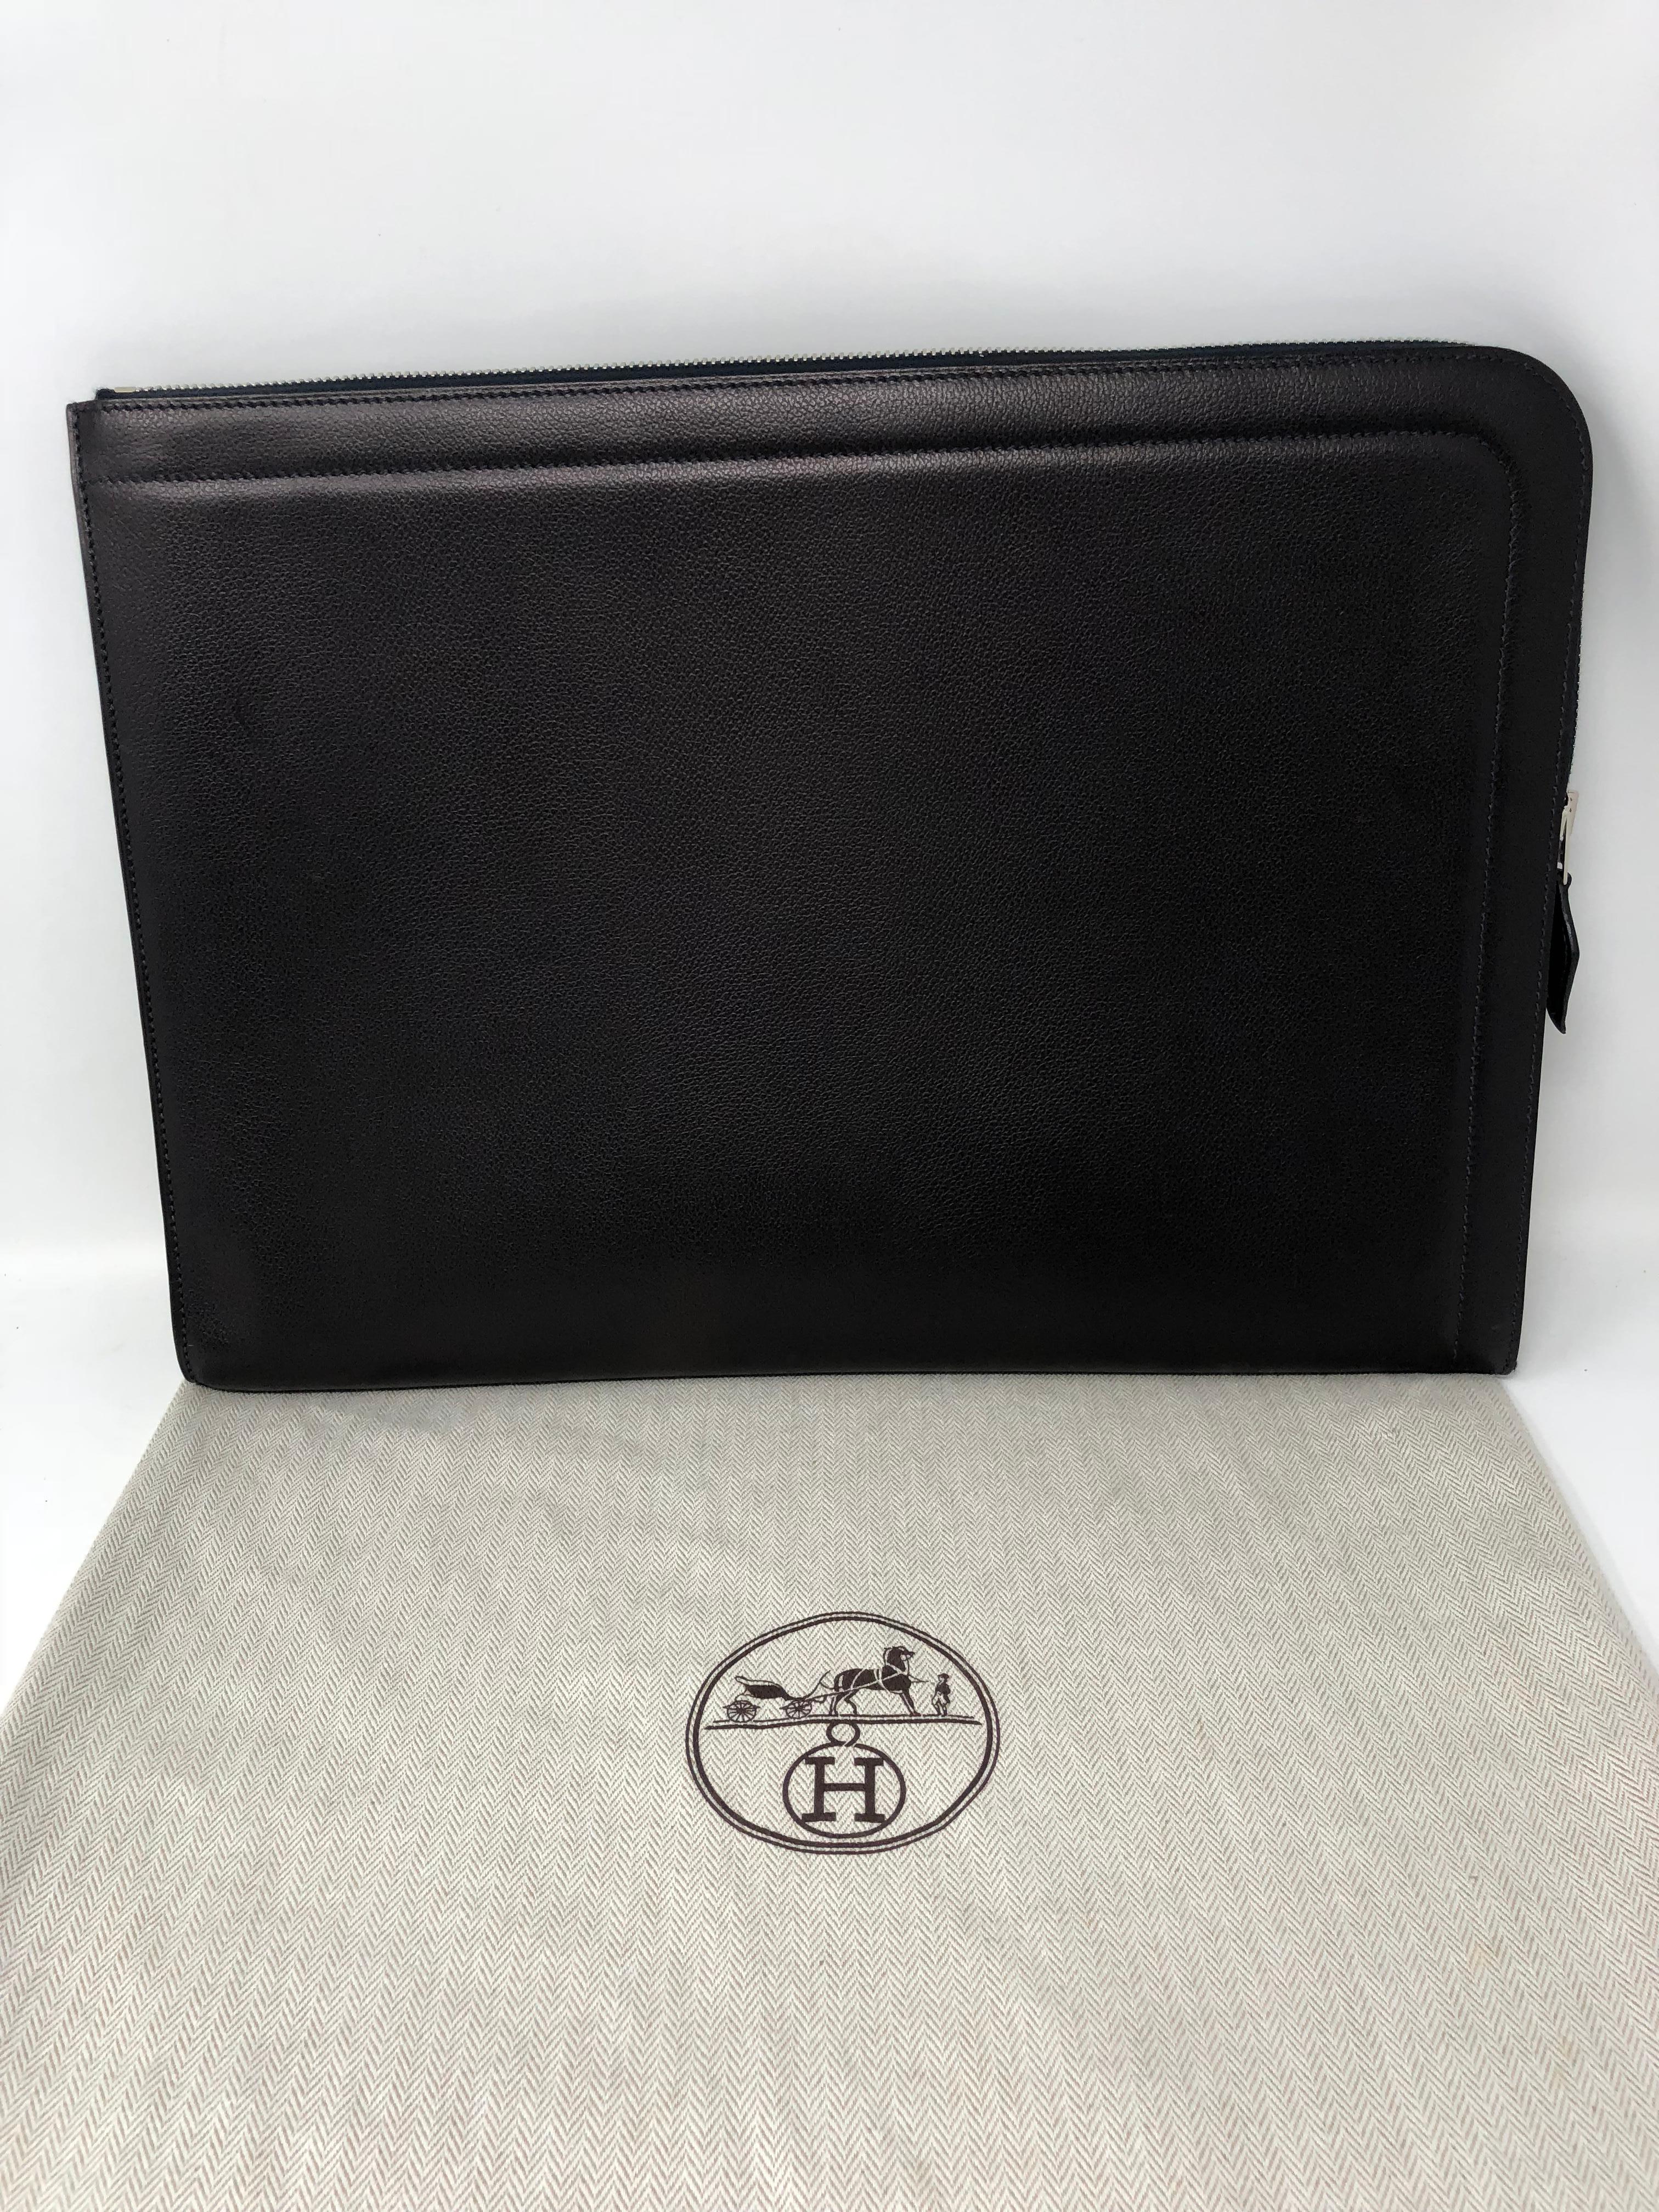 Hermes Zip Computer Laptop Sleeve Case in Bleu Indigo color. Veal Ver Grain leather. Brand new condition. Never worn. Still has the original sticker price inside the bag from Hermes. Stunning dark navy/almost black color with silver hardware. Comes